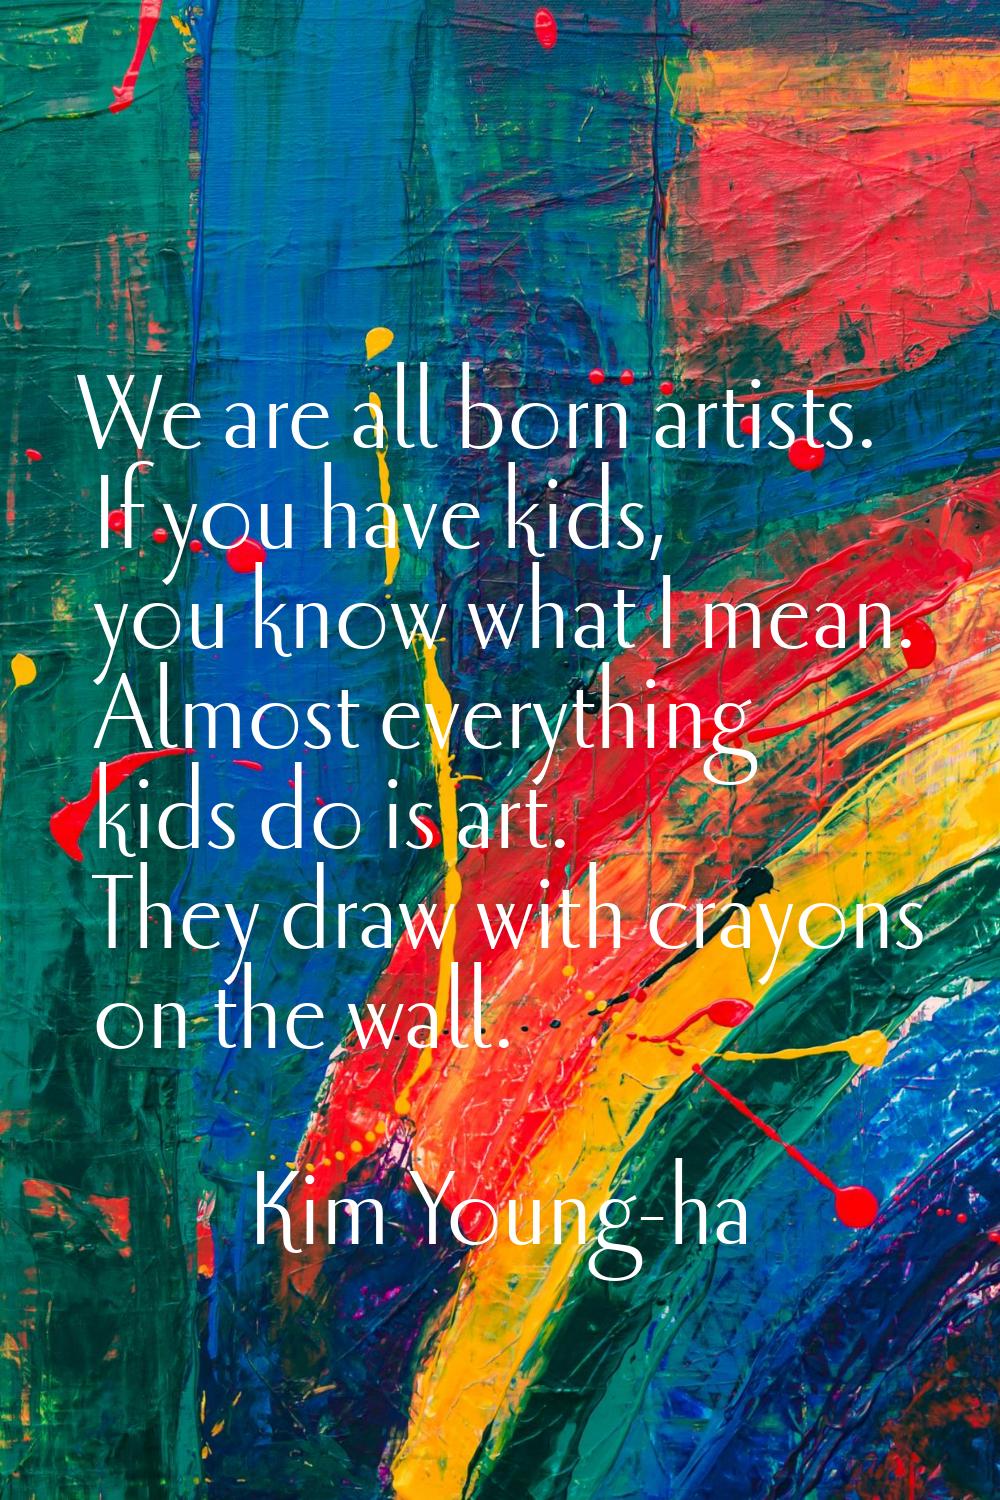 We are all born artists. If you have kids, you know what I mean. Almost everything kids do is art. 